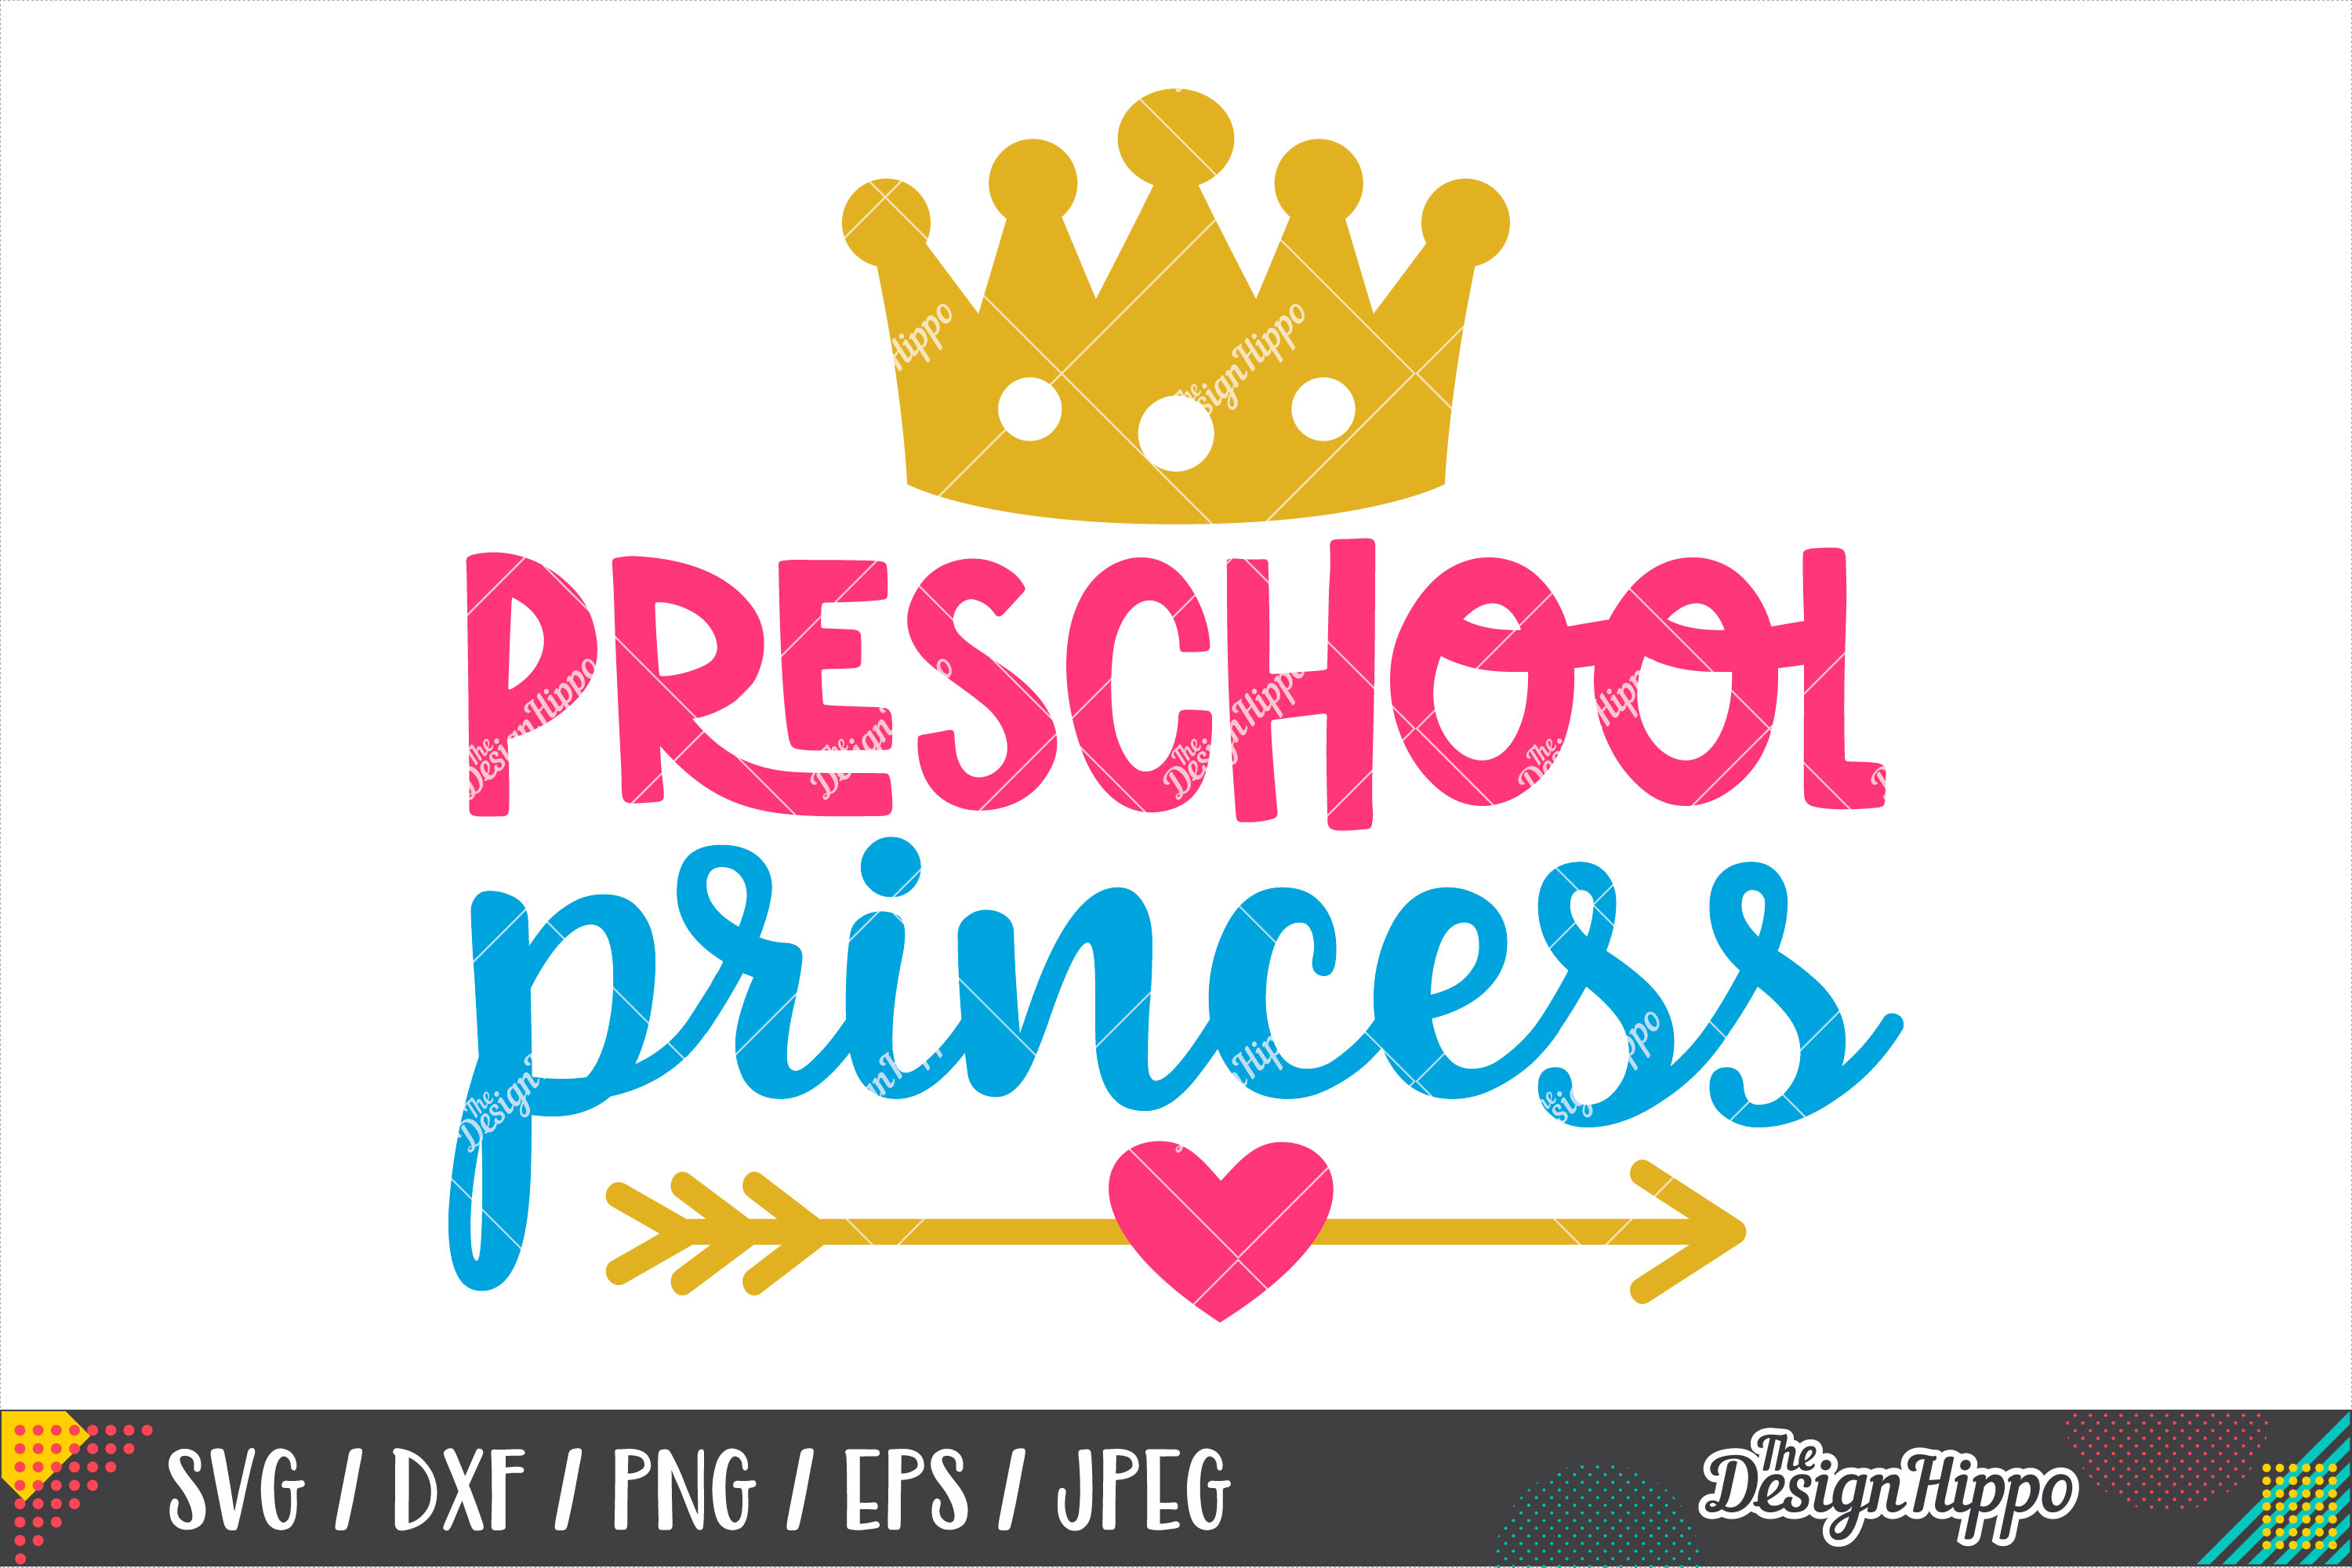 Download Preschool Princess SVG, First Day Of School SVG DXF PNG File